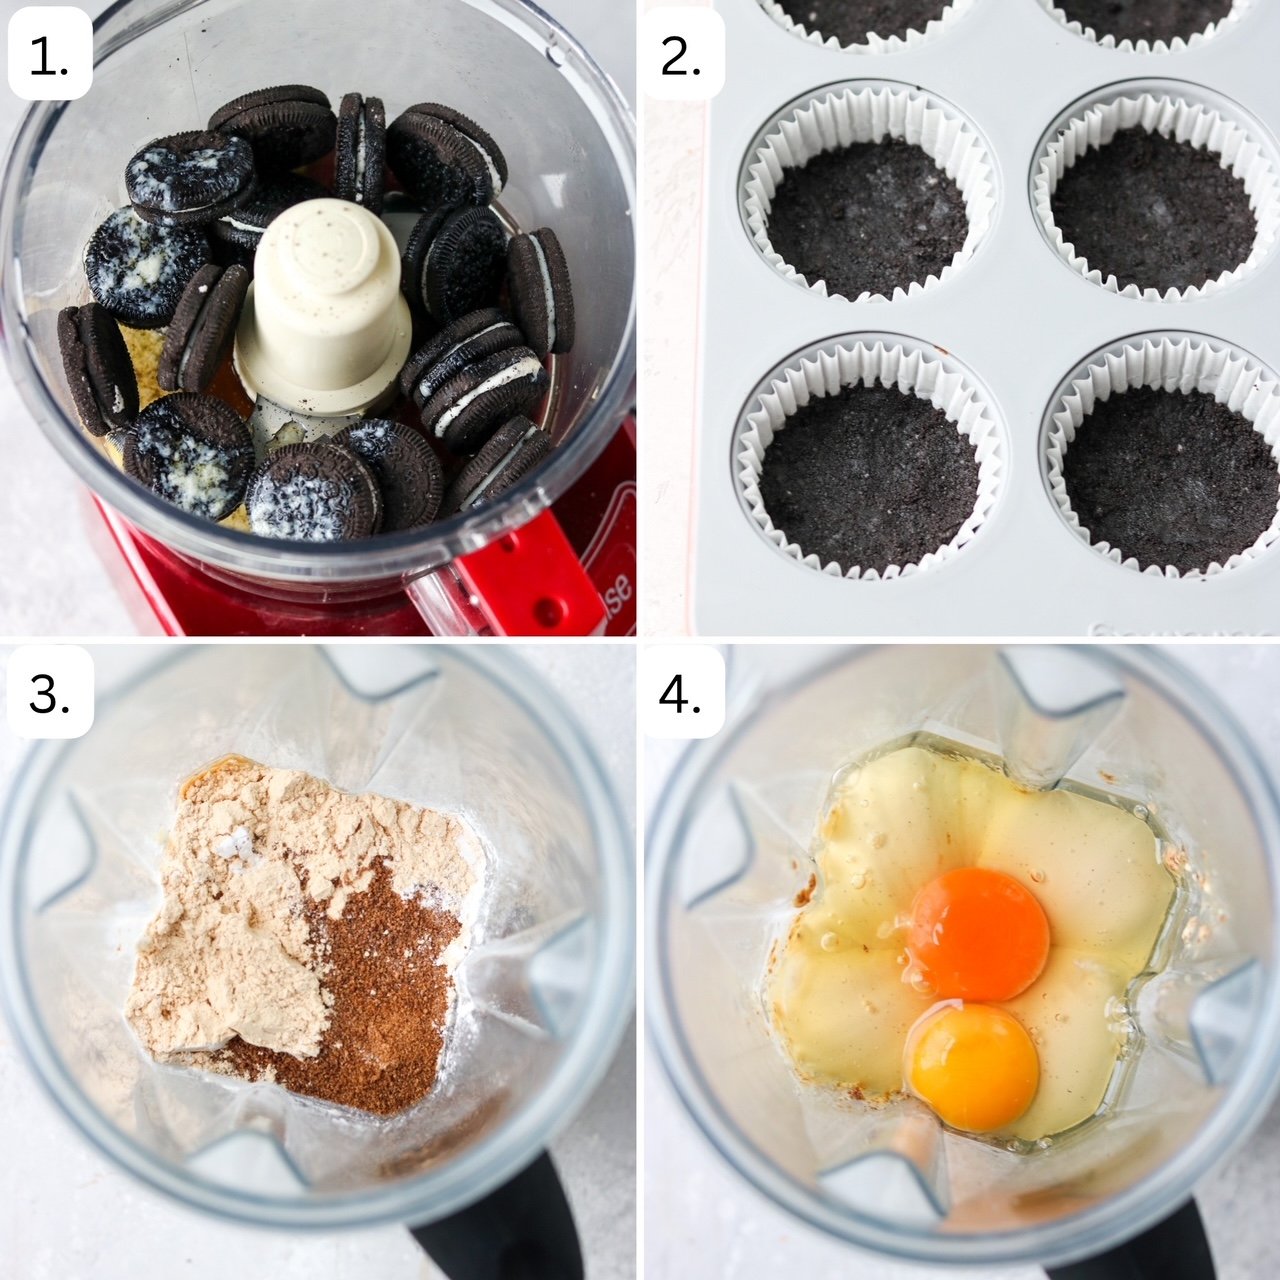 numbered, step by step photos showing how to make this recipe